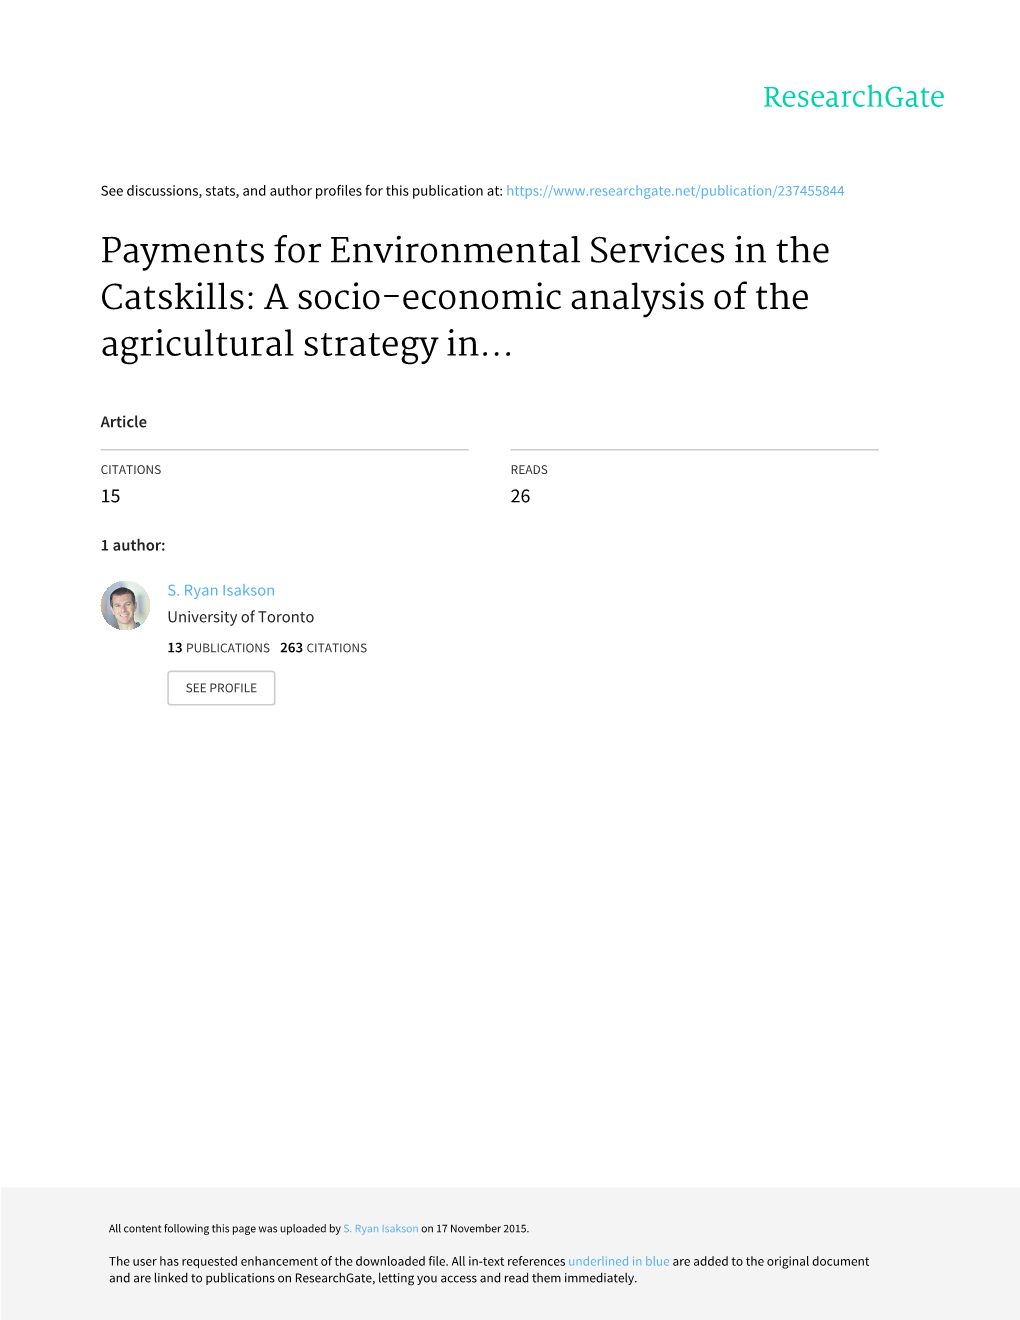 Payments for Environmental Services in the Catskills: a Socio-Economic Analysis of the Agricultural Strategy In